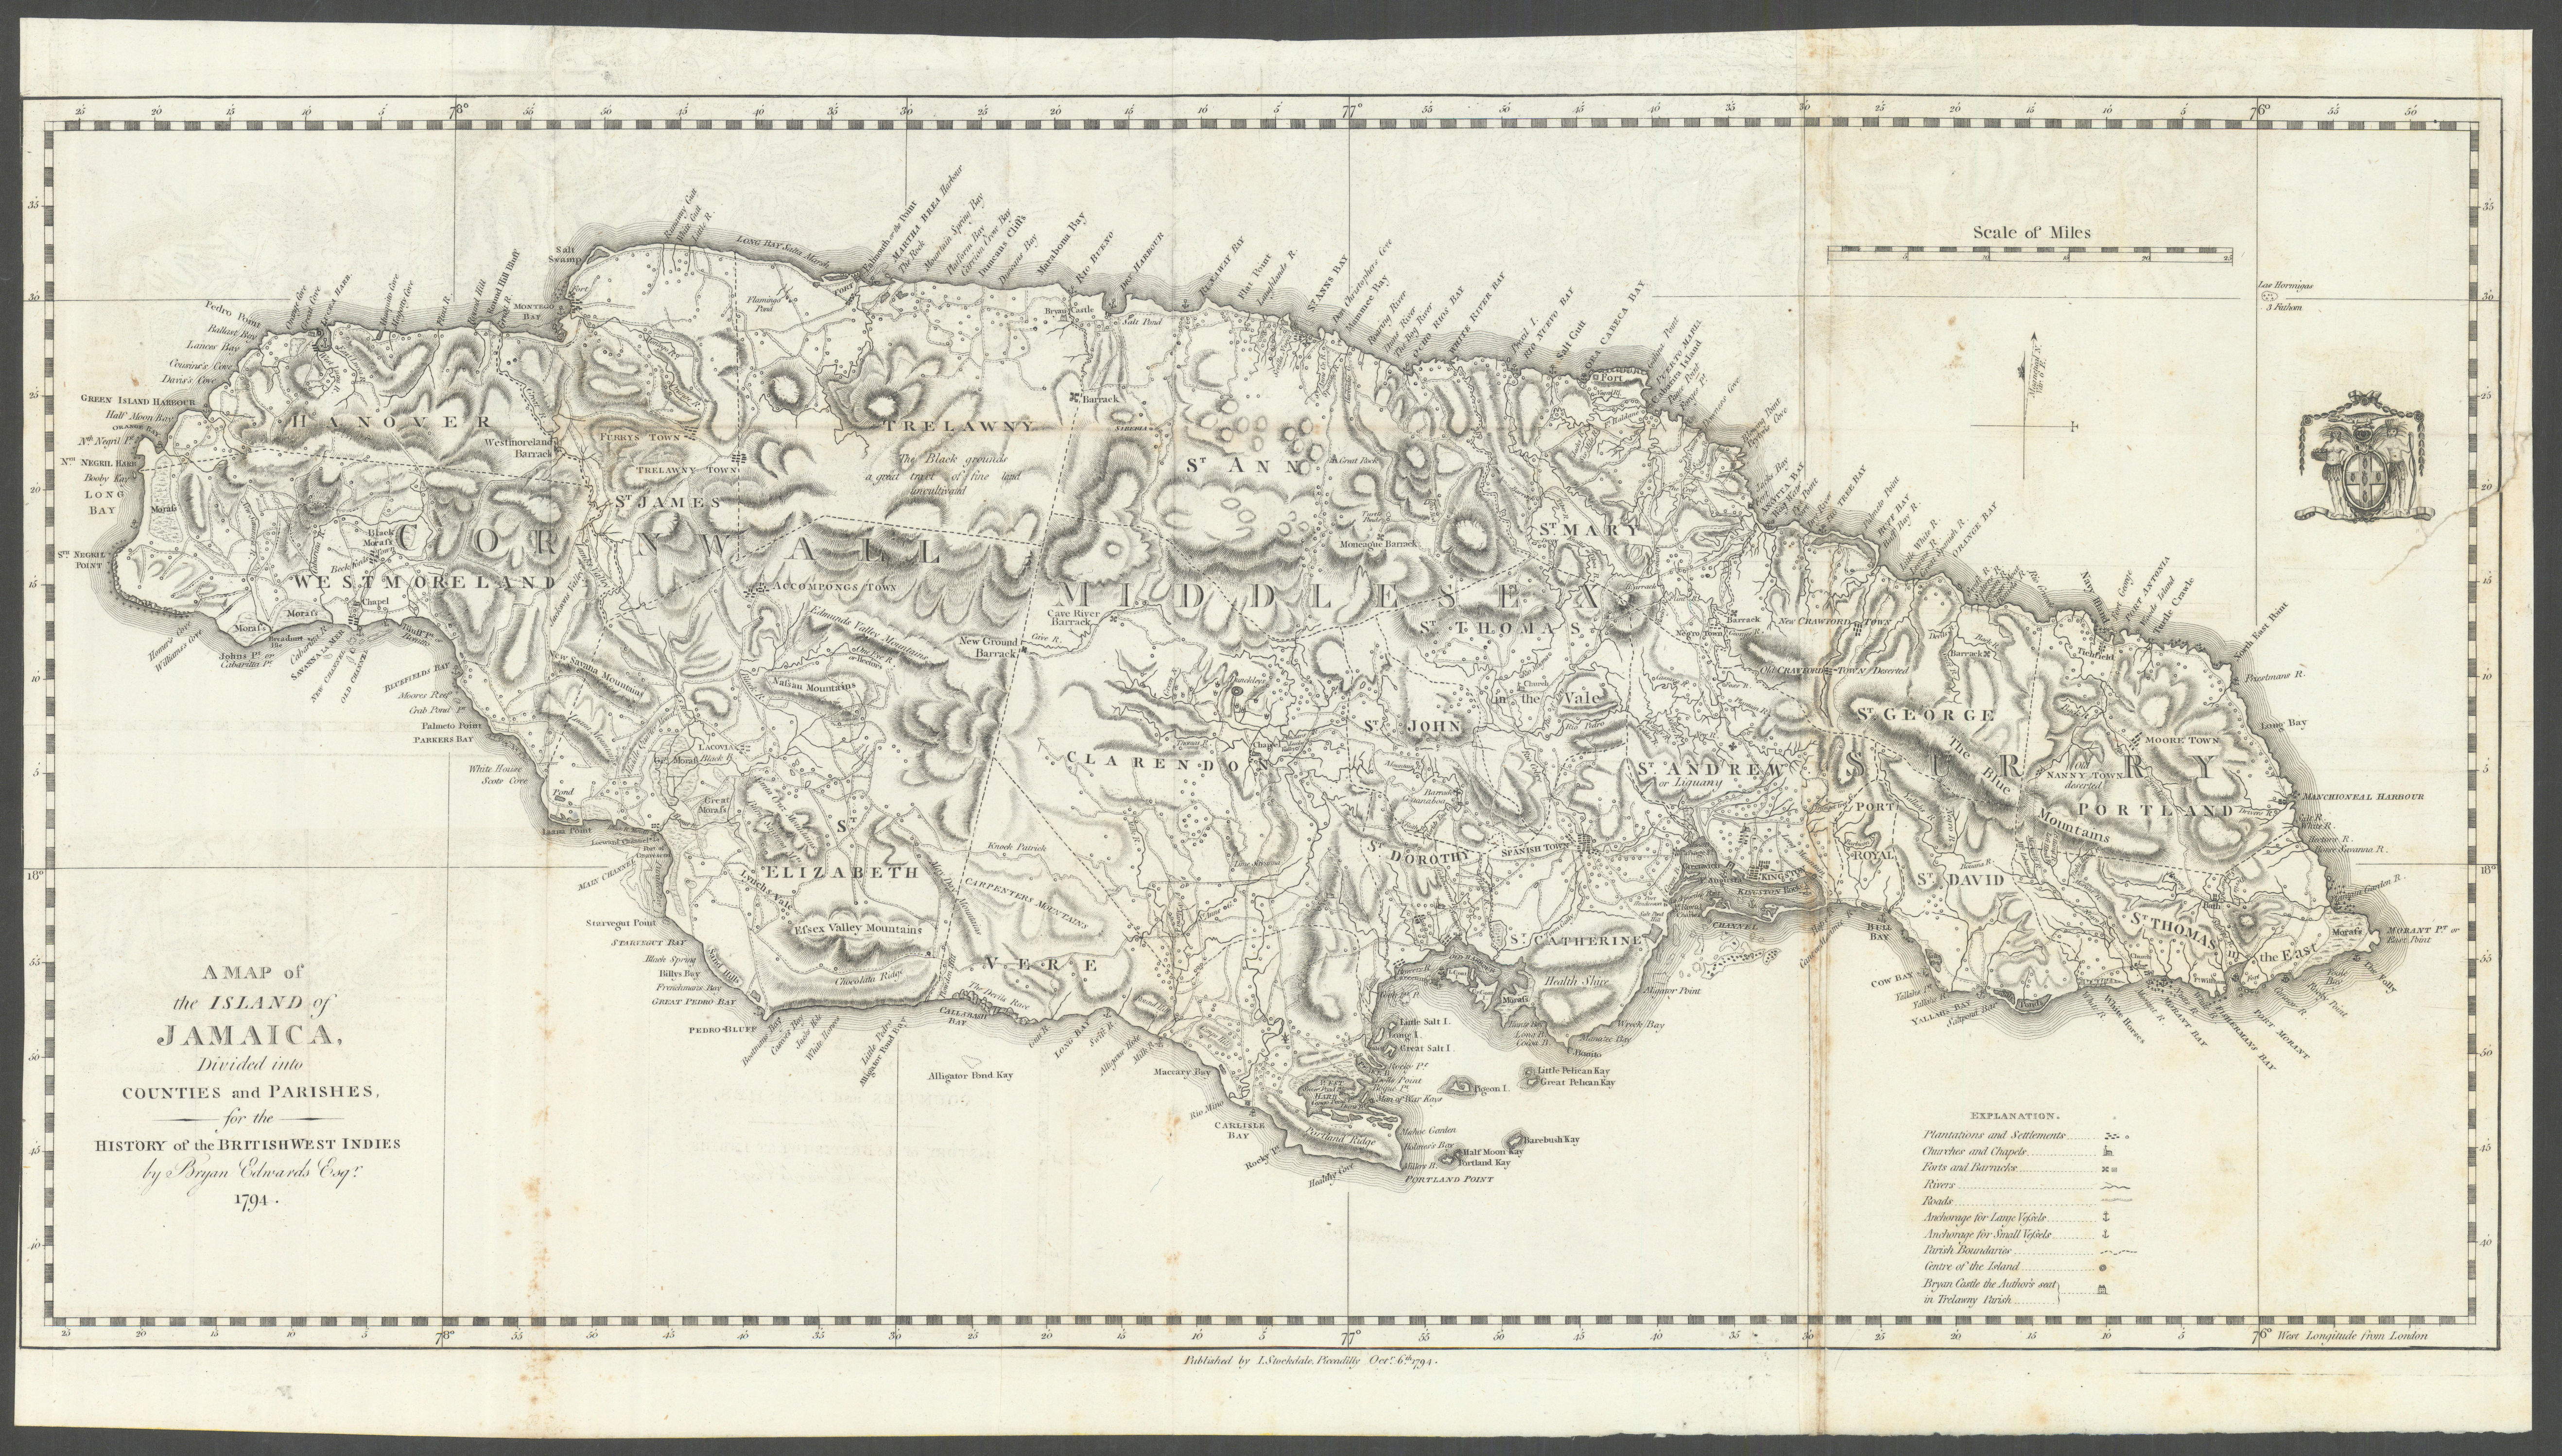 Associate Product 'A Map of the Island of JAMAICA', by Bryan EDWARDS. West Indies. Caribbean 1794